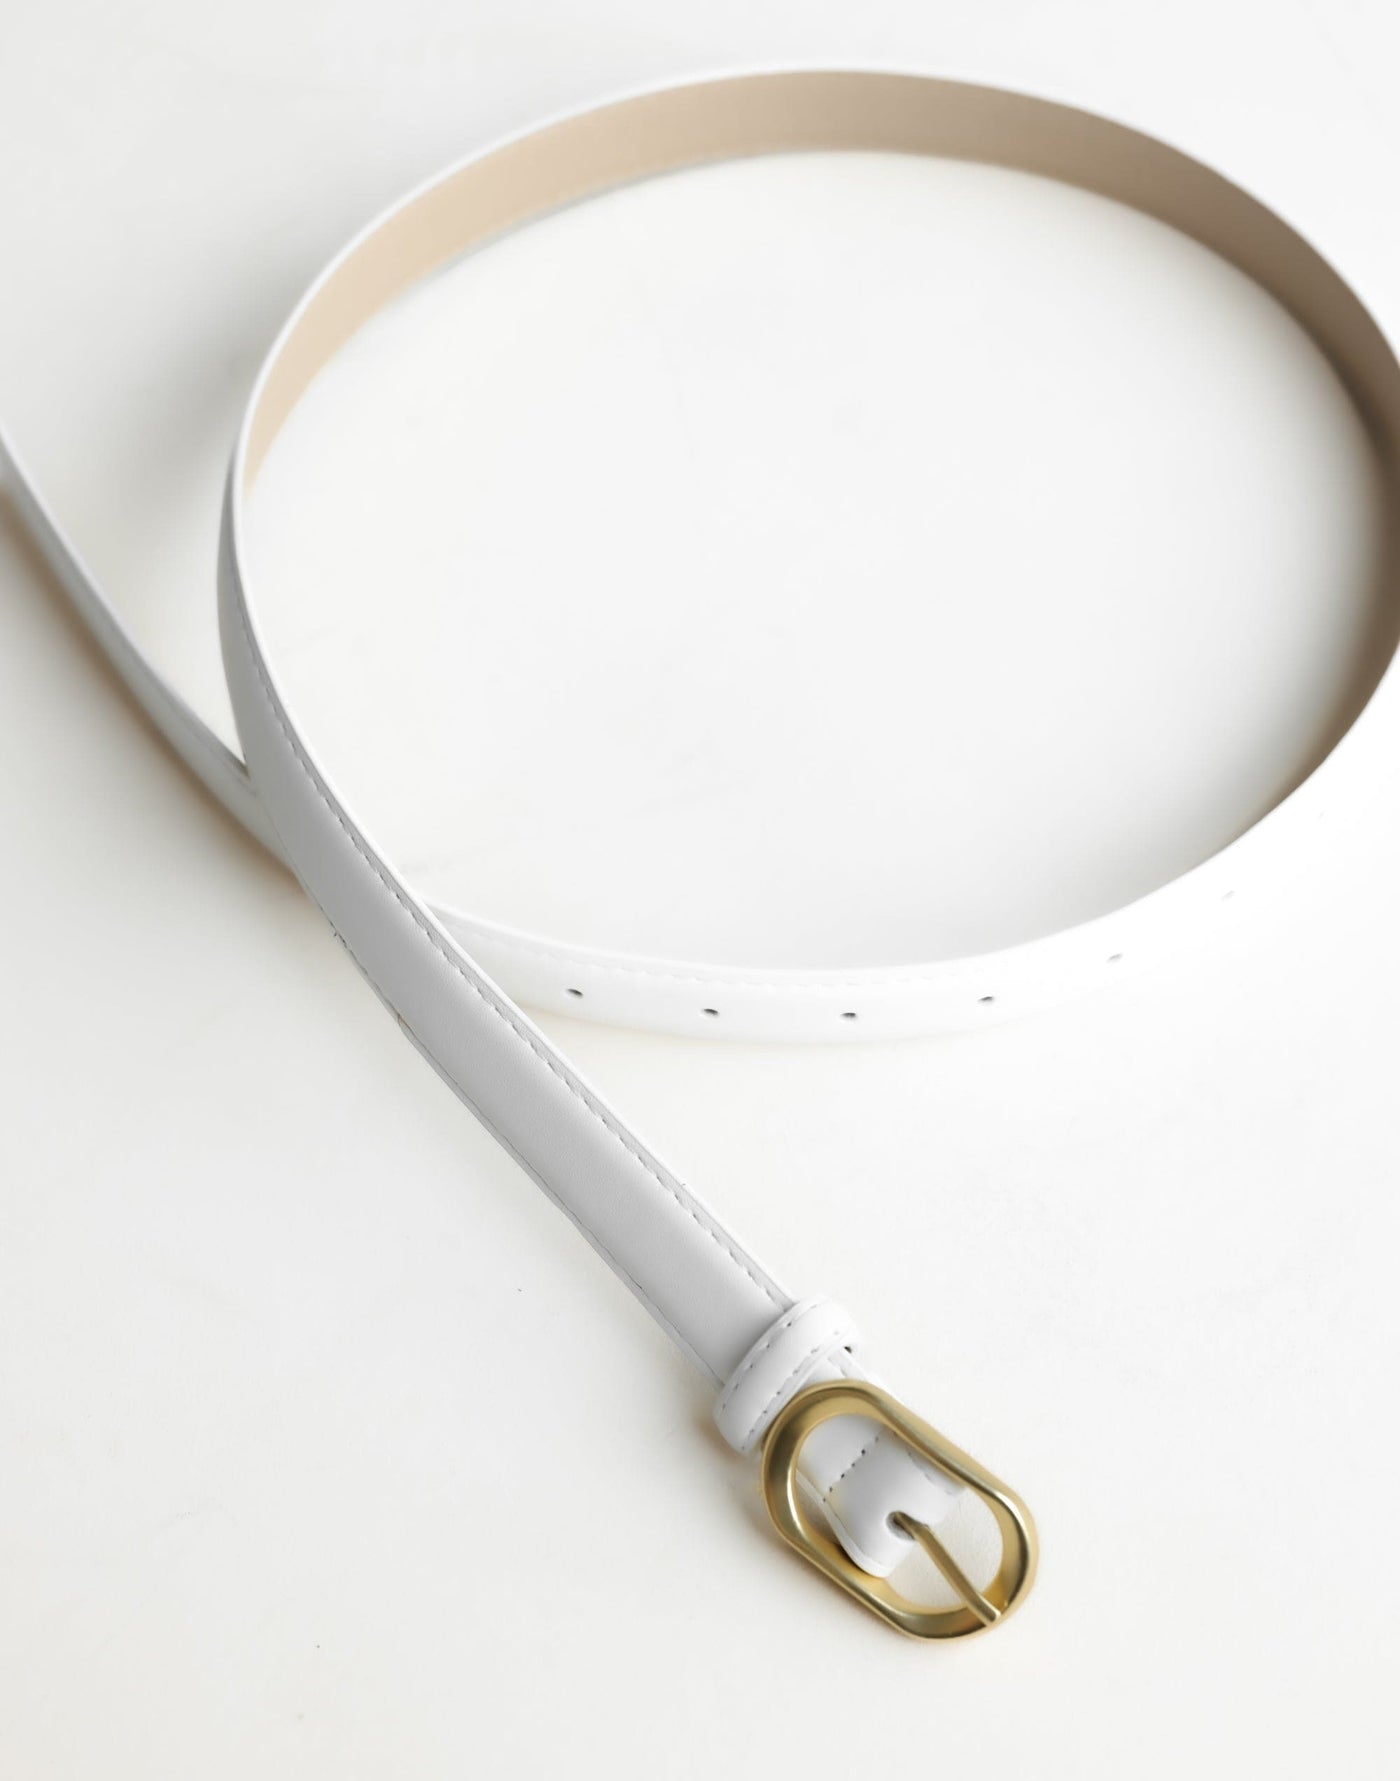 Darcey Belt (White) | CHARCOAL Exclusive - Thin Gold Hardware Belt - Women's Accessories - Charcoal Clothing